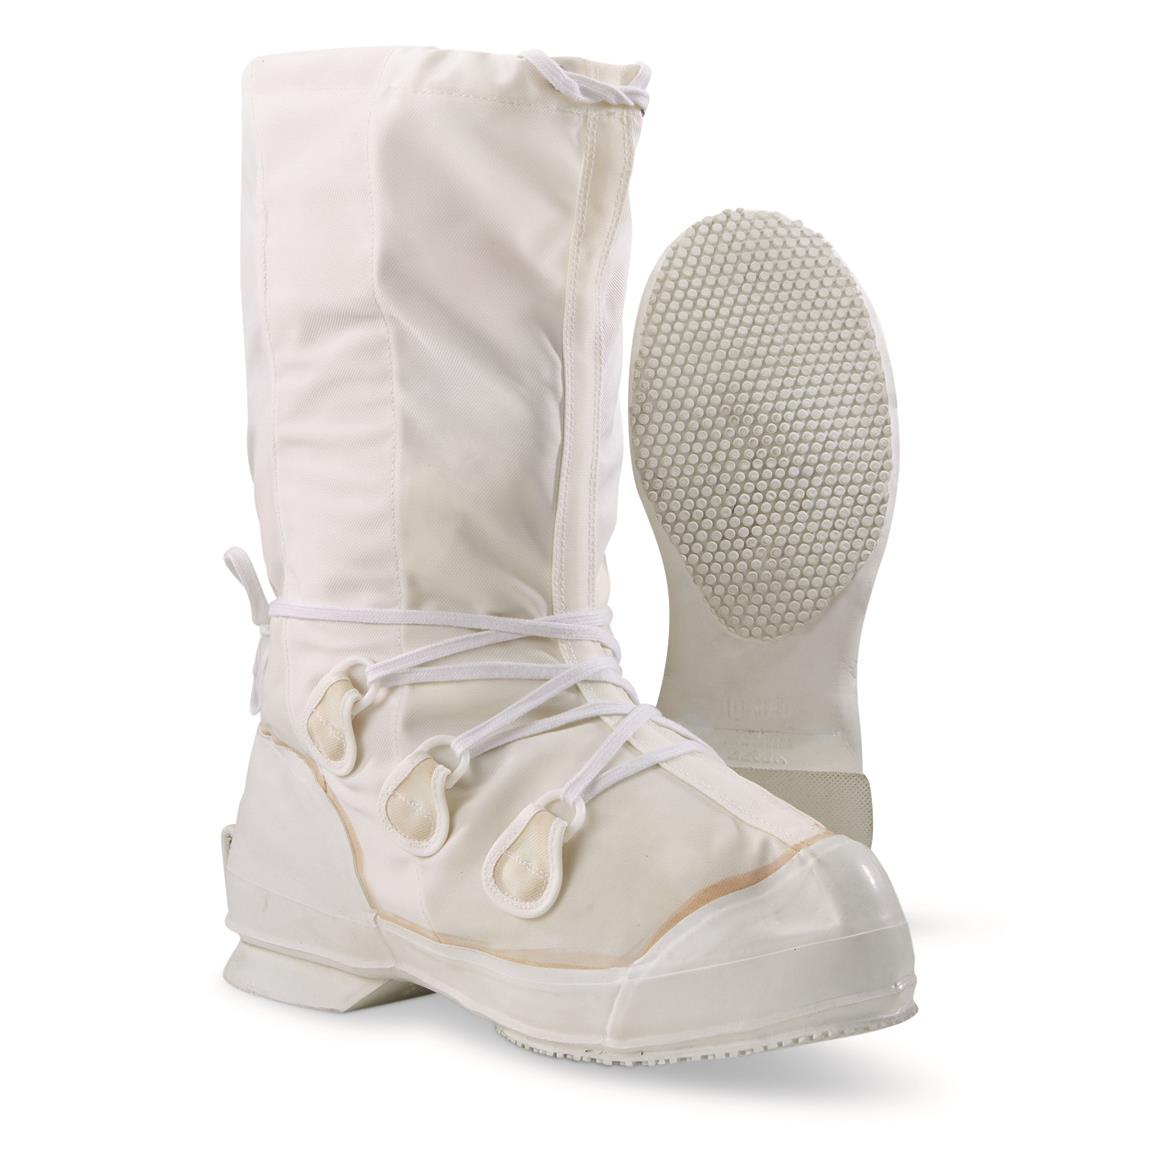 German Military Surplus Canvas Mukluk Overboots, New, White